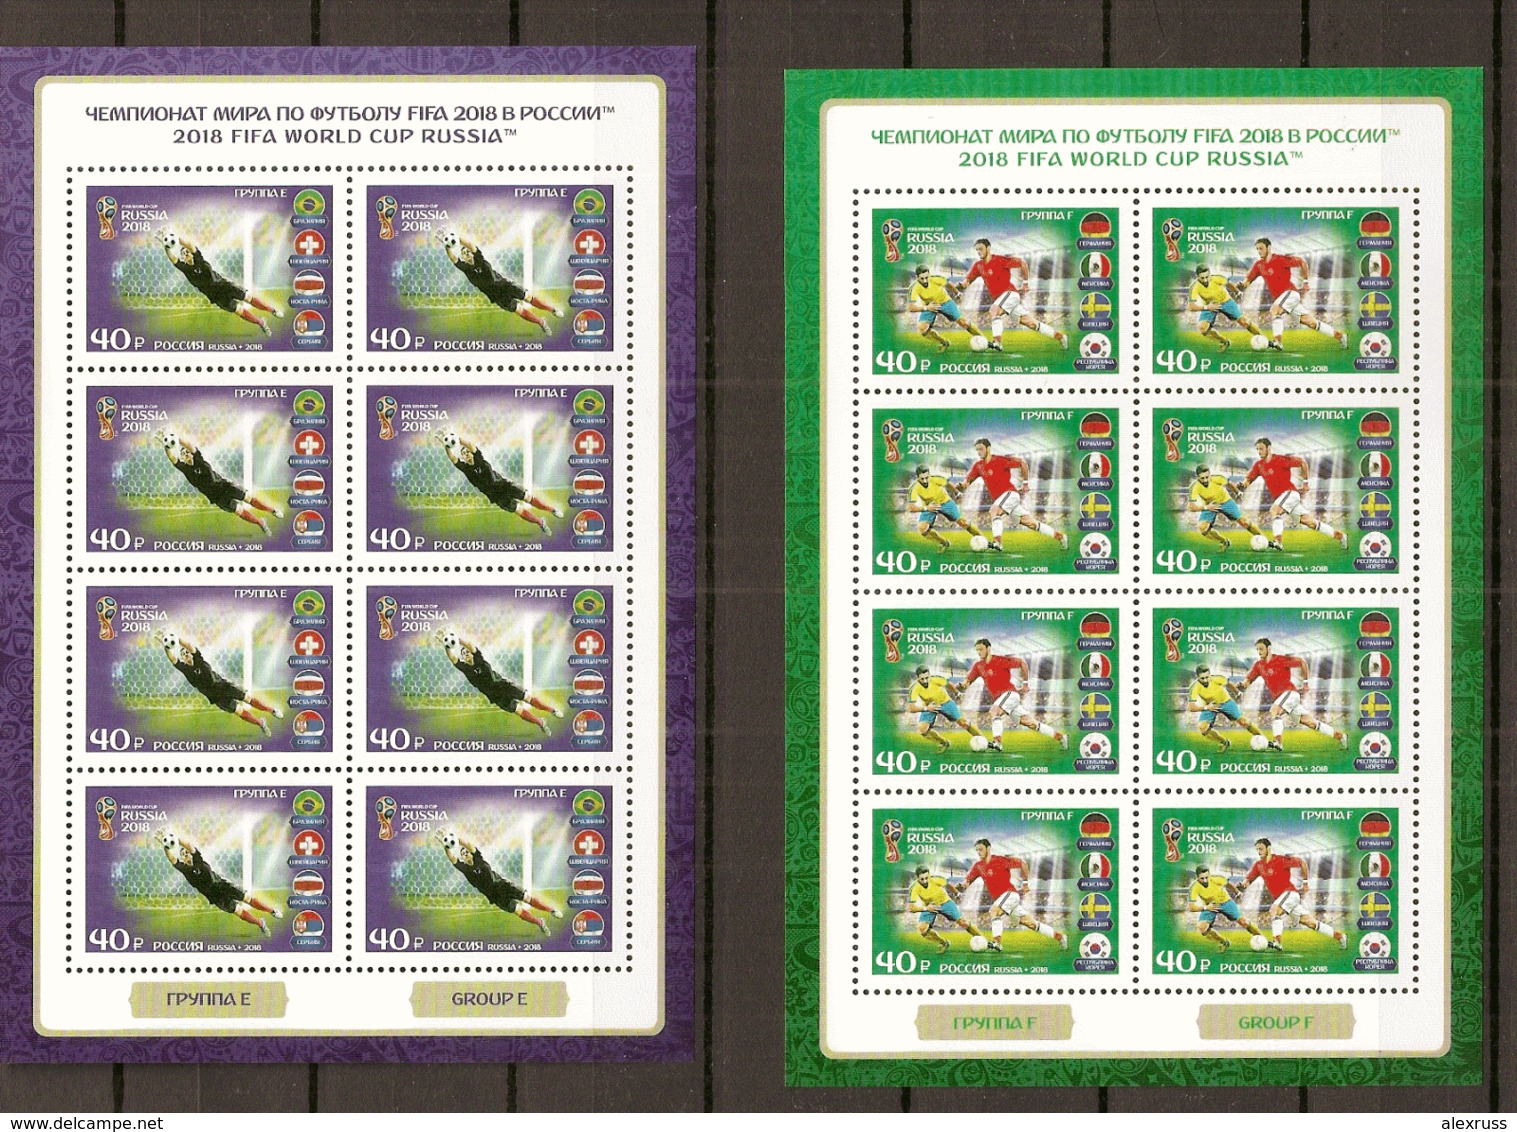 RUSSIA 2018,Complete Series 8 Full Sheets,FIFA World Cup Russia 2018,Participating Teams,XF MNH** - Feuilles Complètes